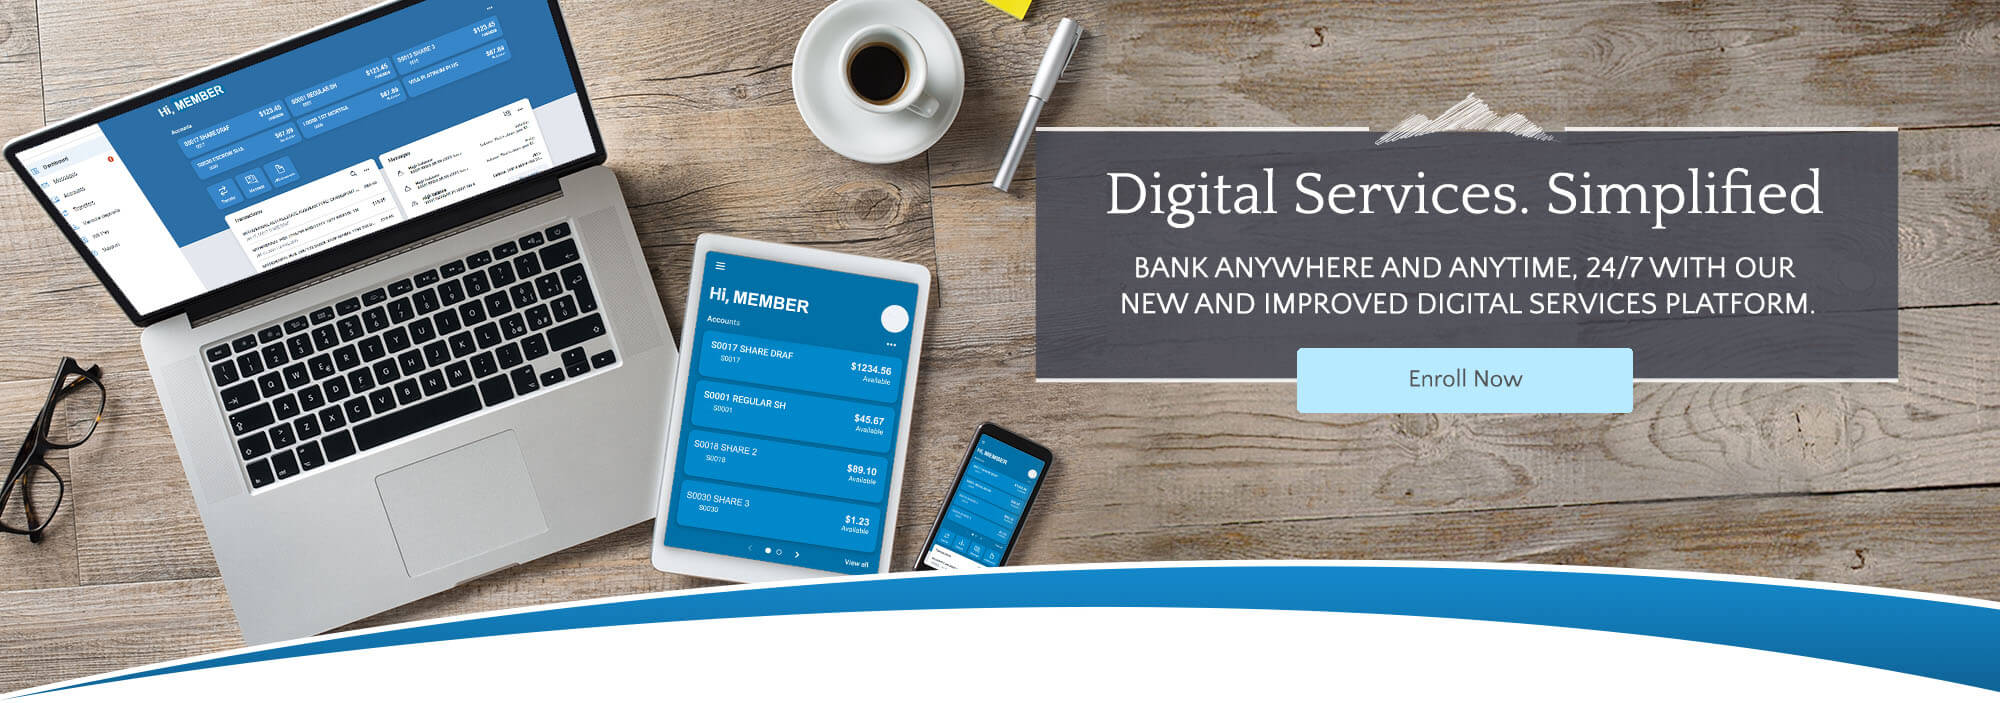 Digital Services. Simplified. Bank anywhere and anytime. 24/7 with our new and improved digital services platform.